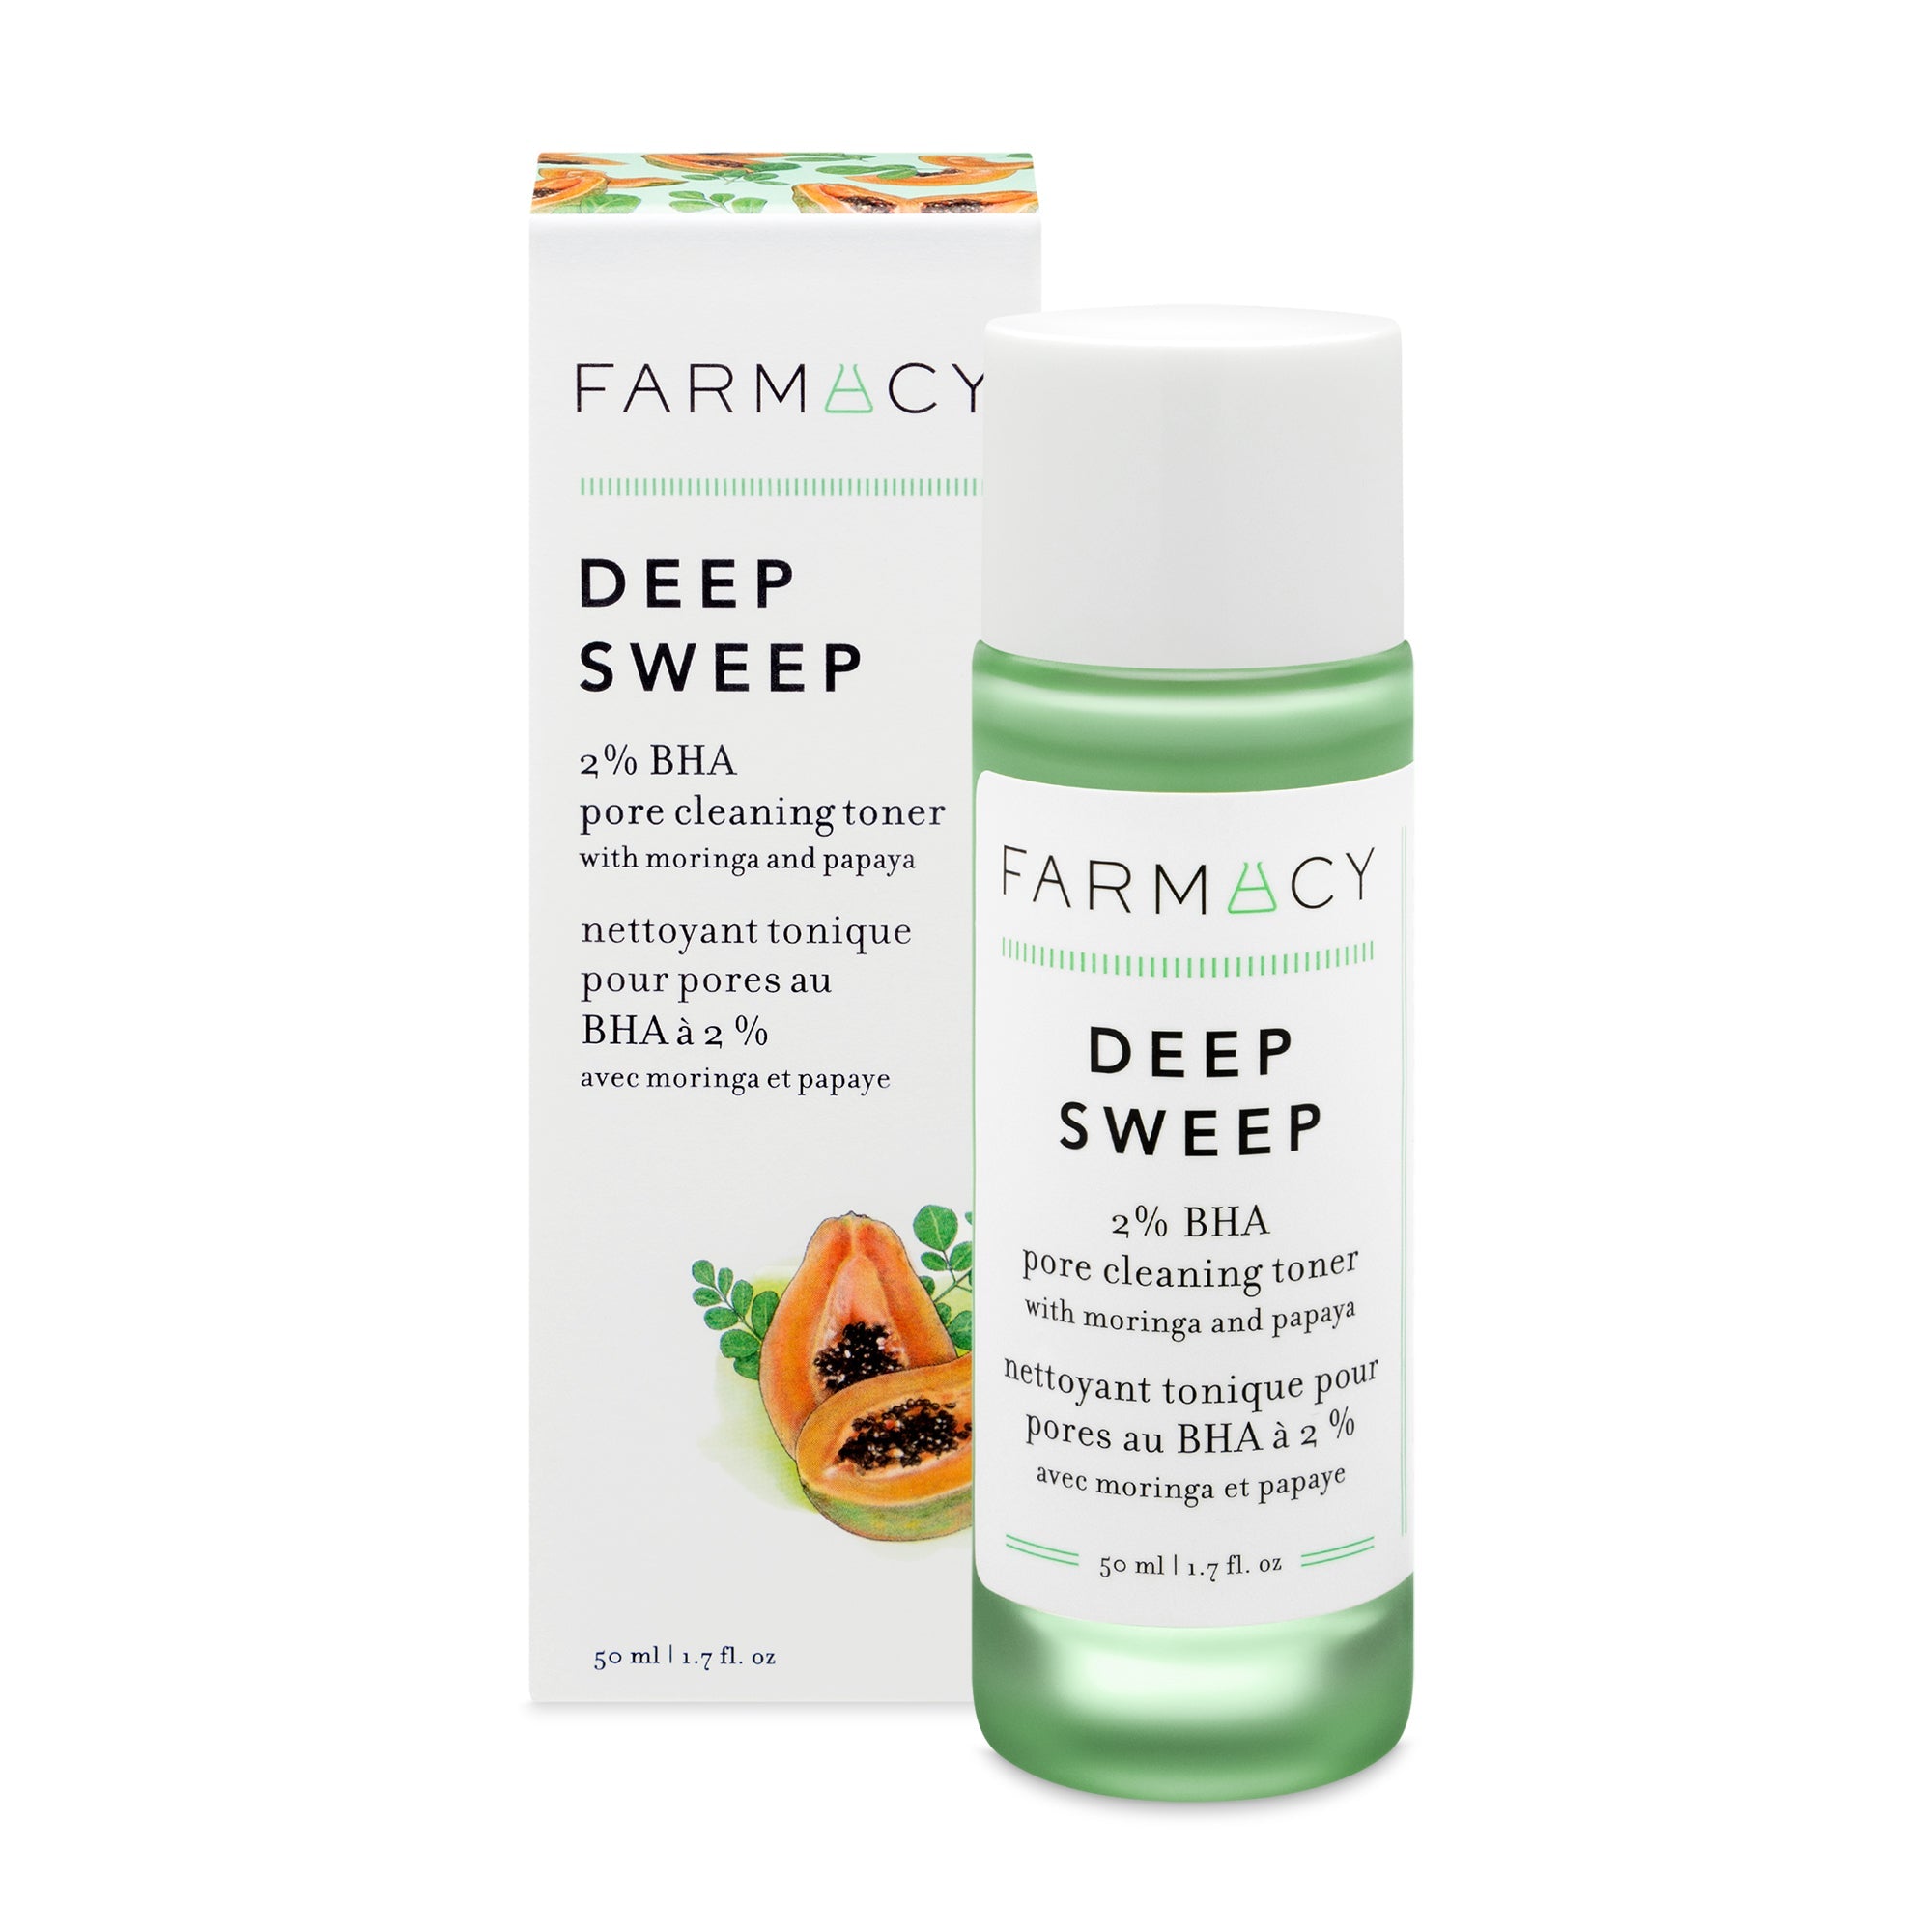 A box and bottle of Farmacy's Deep Sweep Mini Pore Cleaning Toner